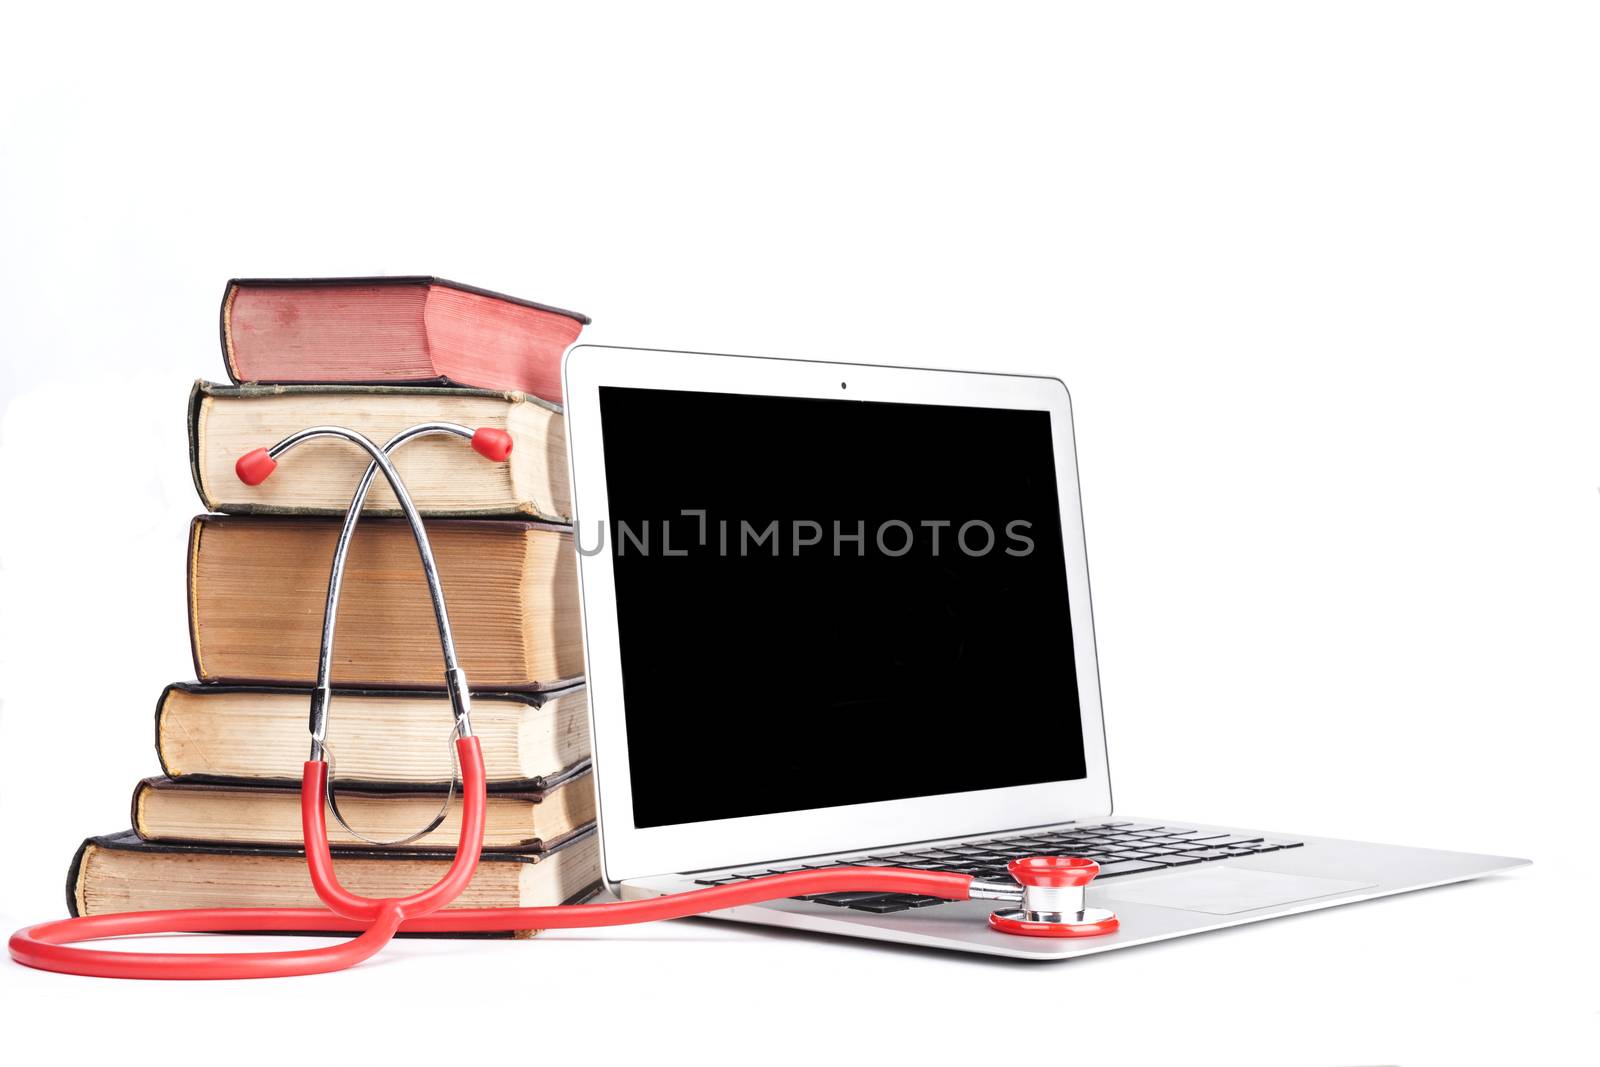 Silver laptop with red stethoscope and old pooks pile isolated on white background